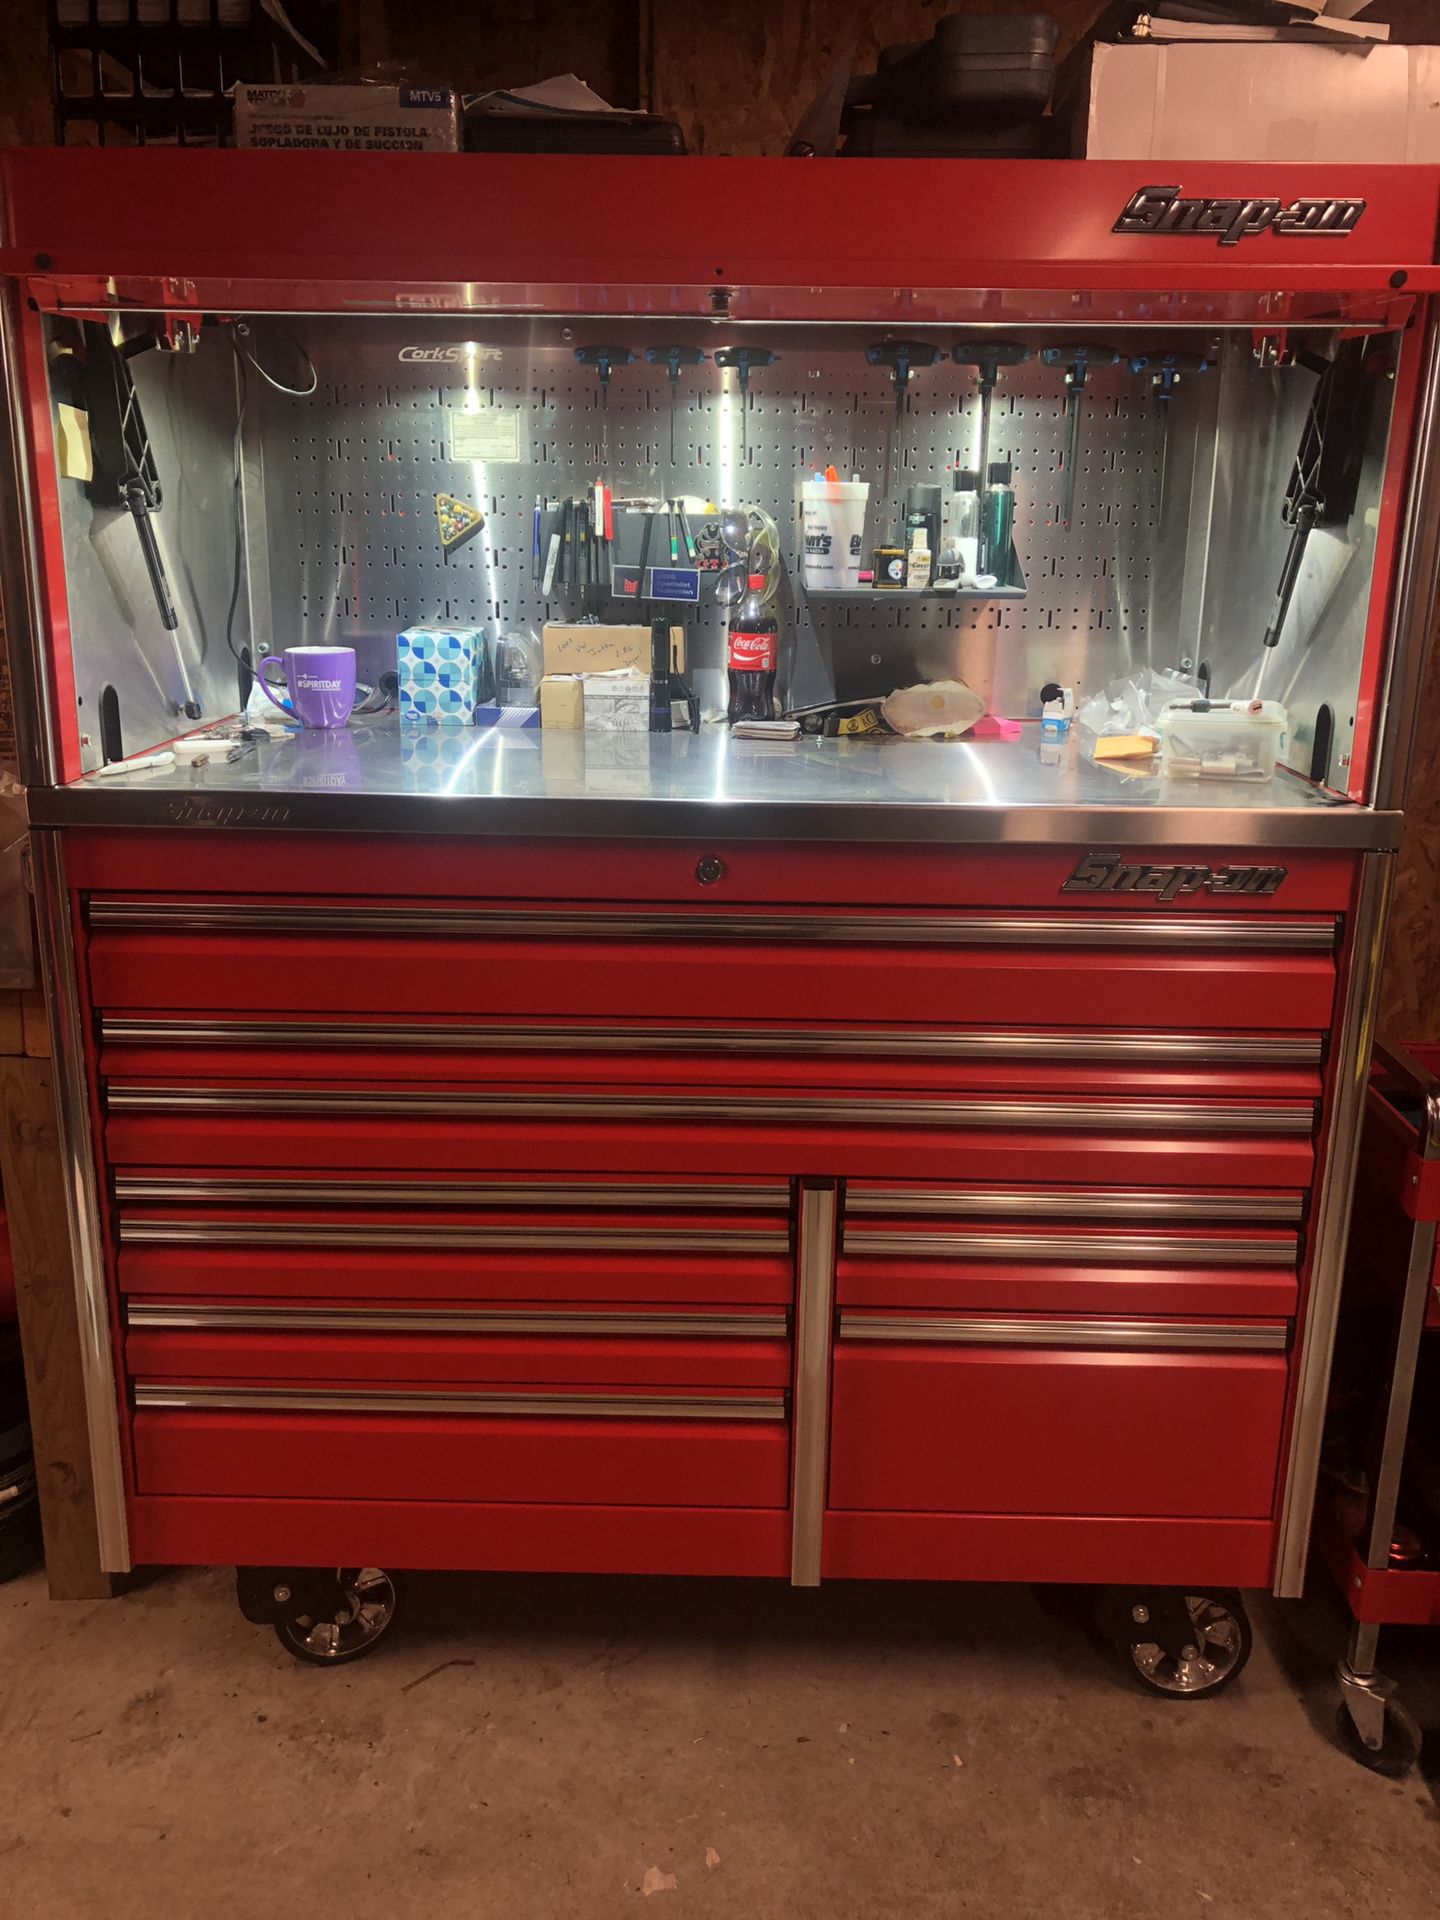 Snap on epiq series tool box with hutch and stainless steel top